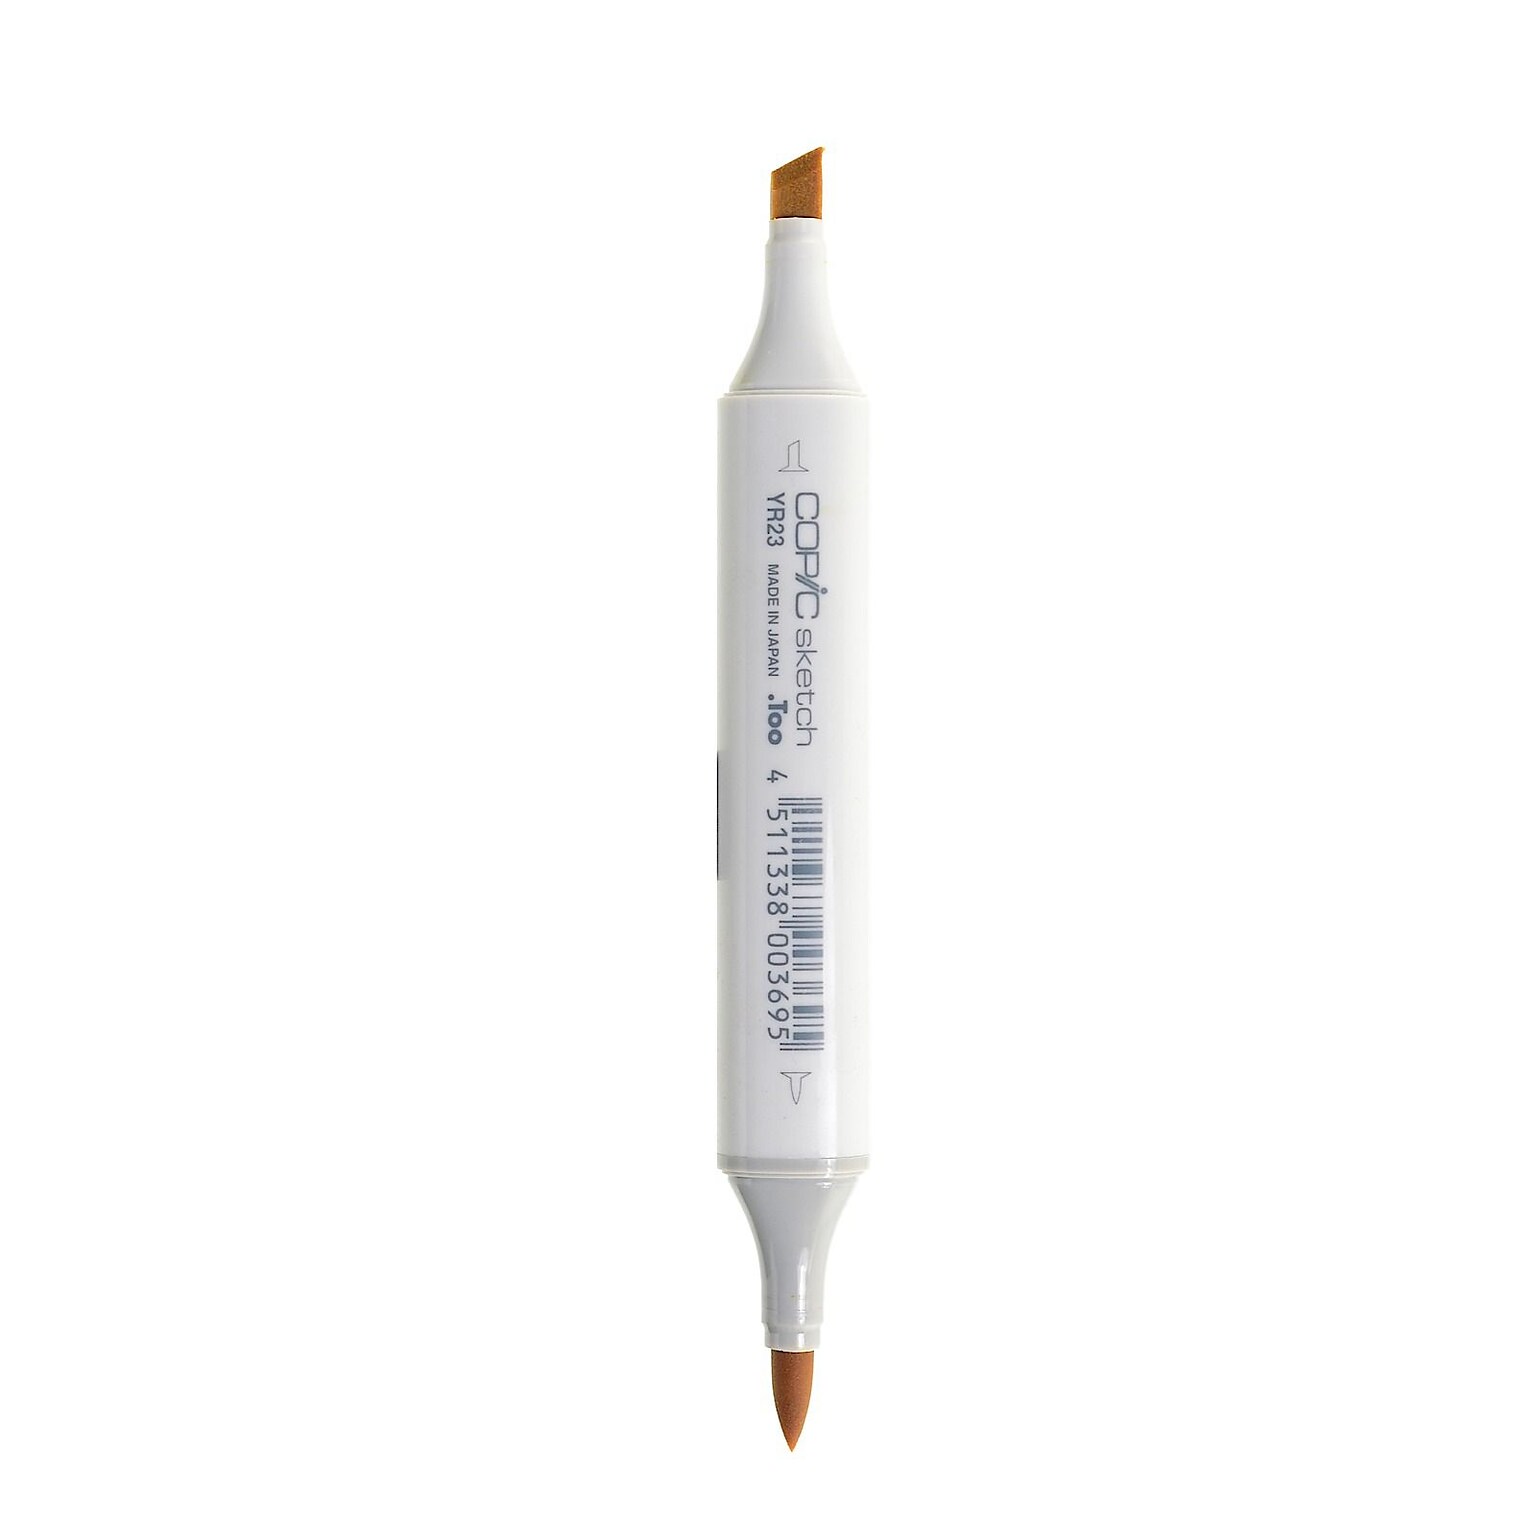 Copic Sketch Markers, Twin Tip, Yellow Ochre, 3/Pack (3PK-YR23S)